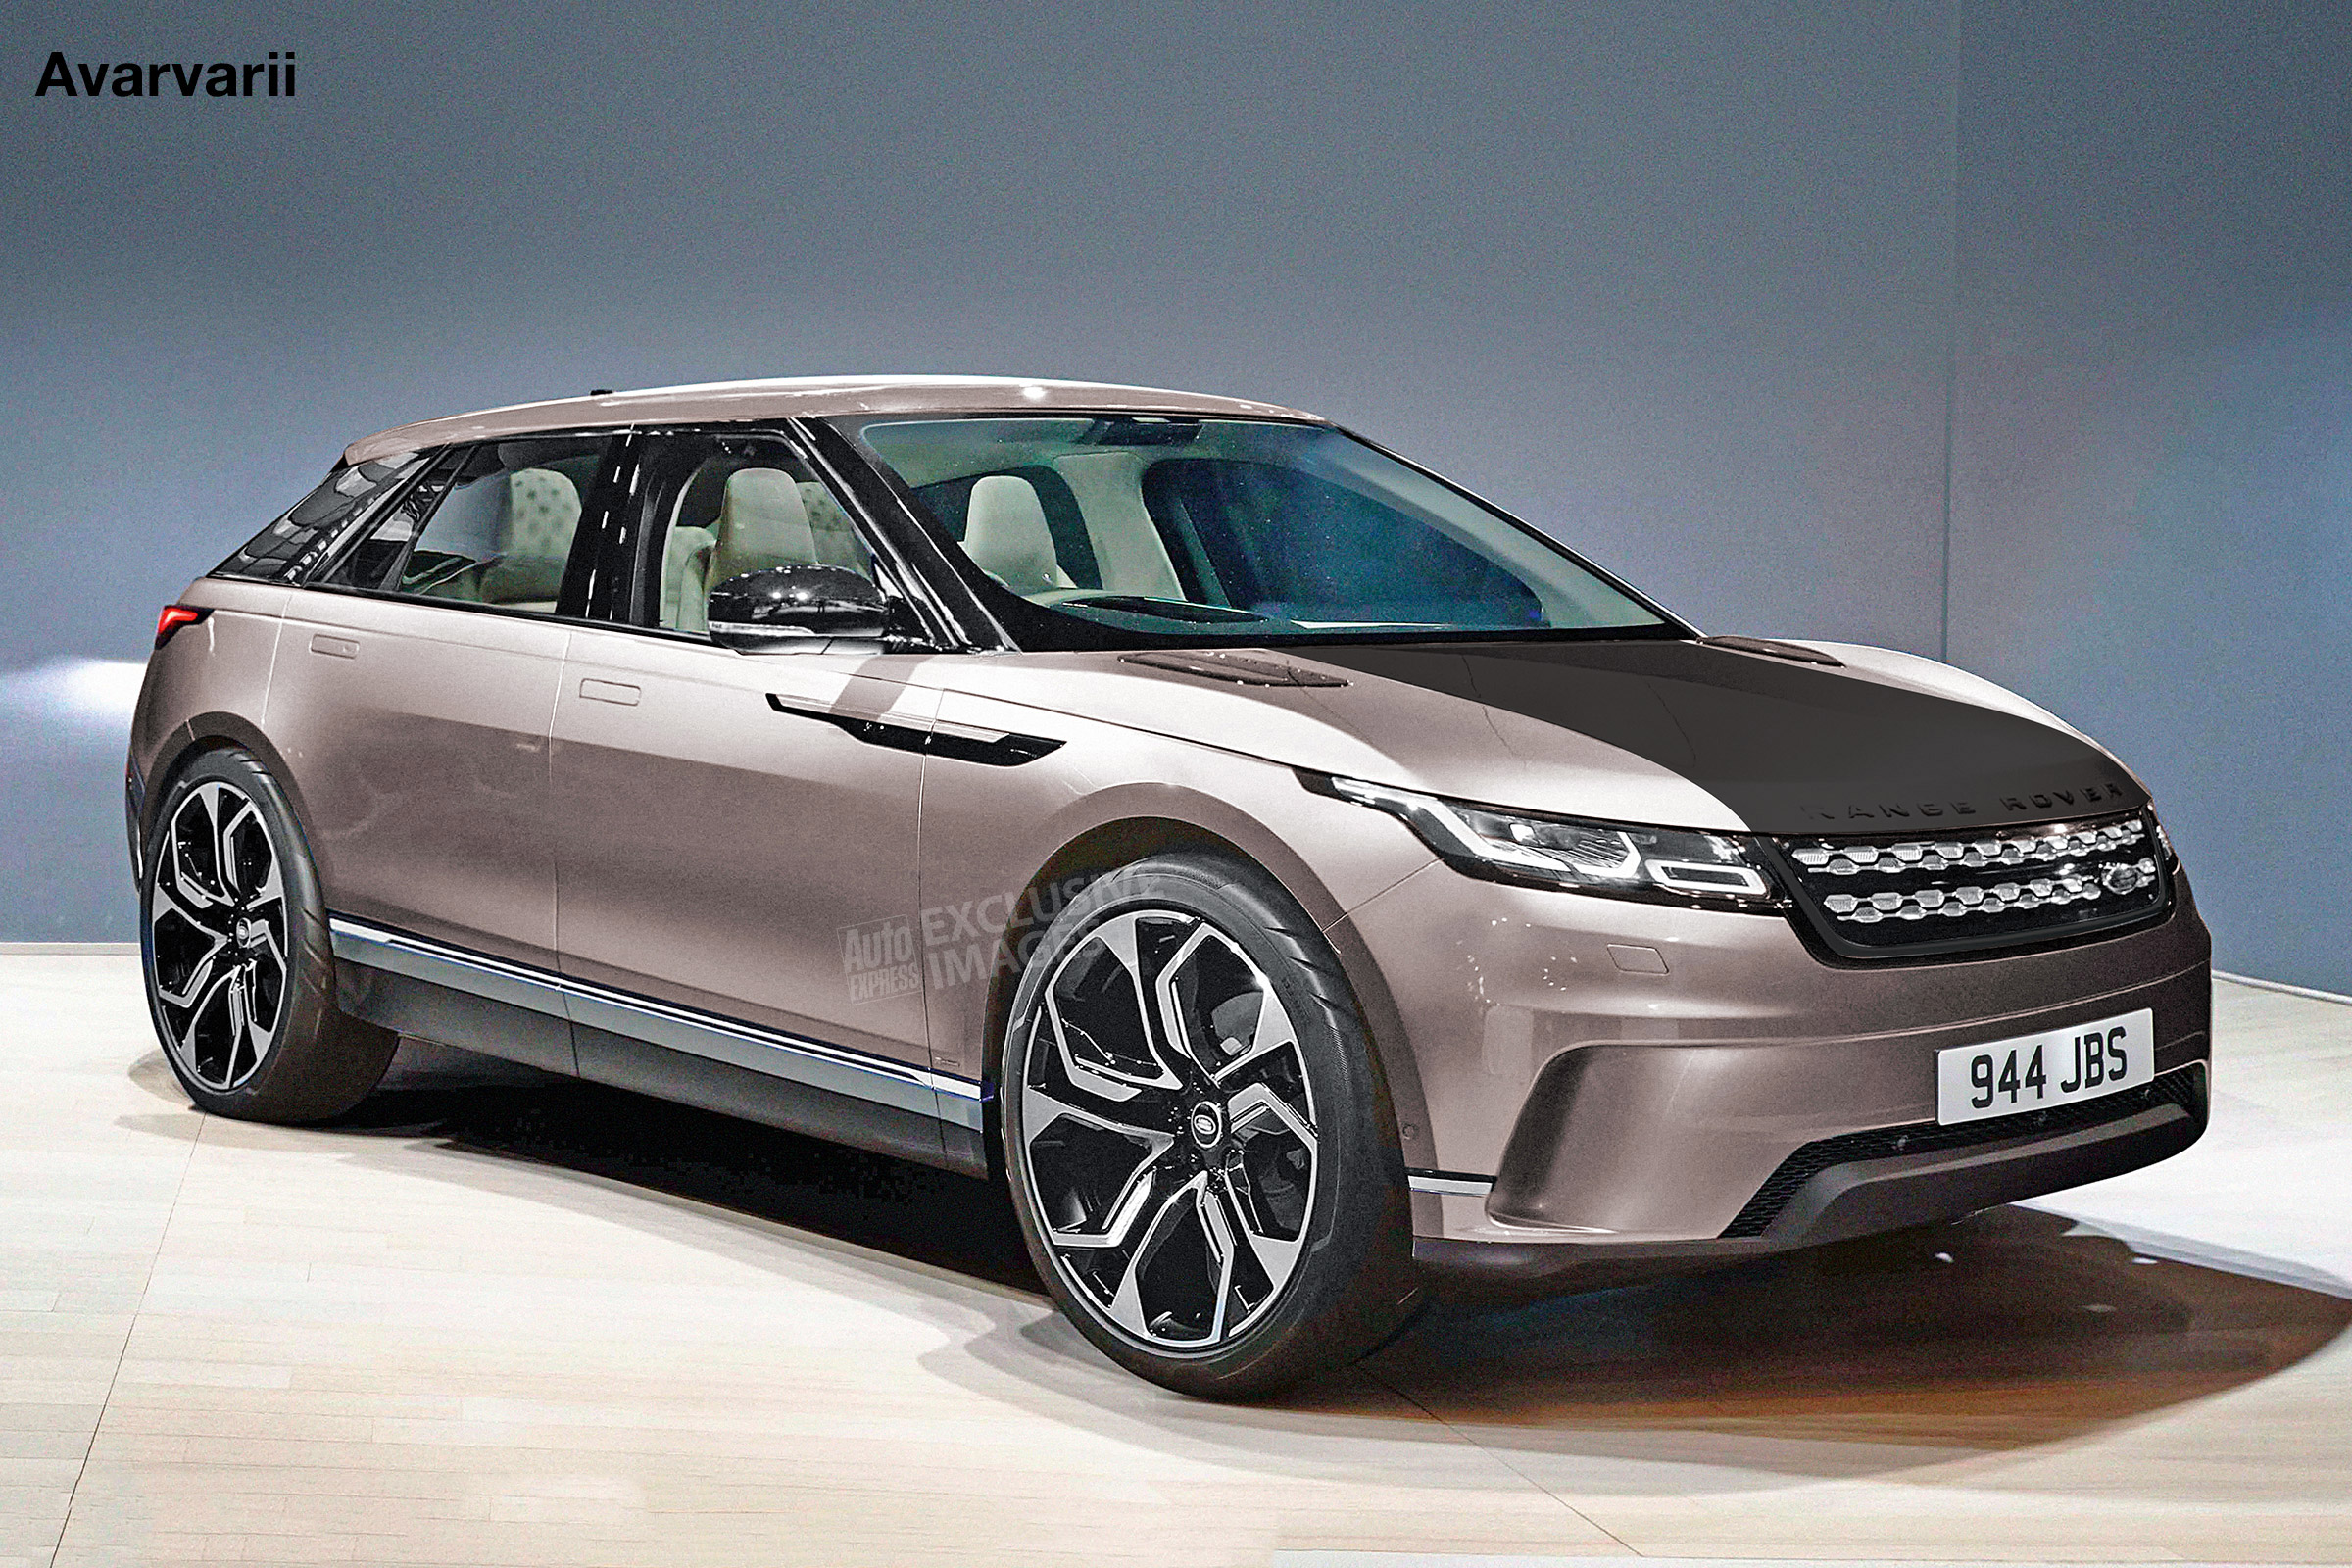 New 2021 Range Rover Crossover to arrive with all-electric ...